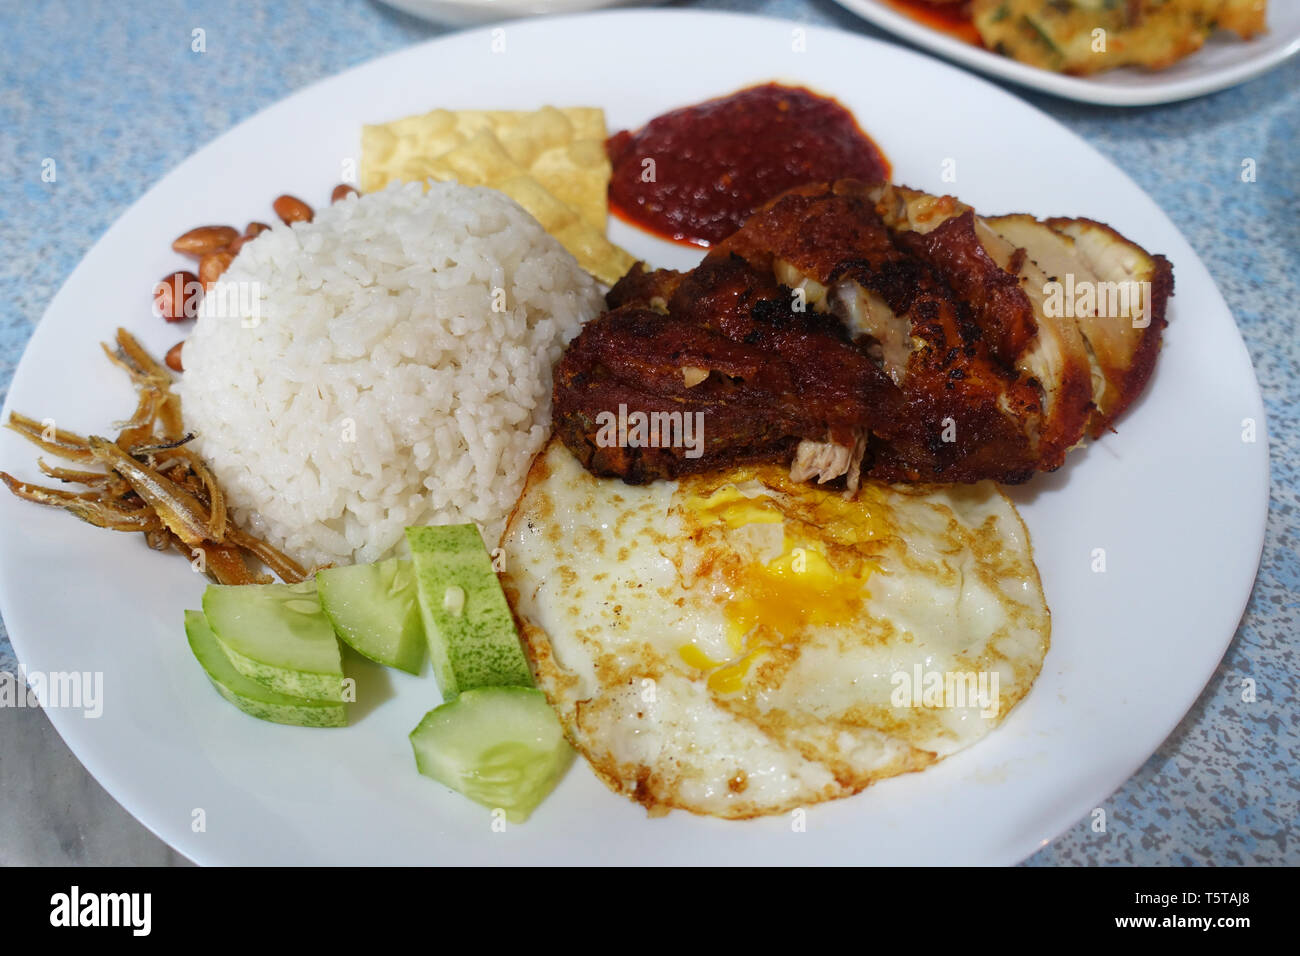 Nasi Lemak, Malaysian coconut rice served with fried egg, cucumber, fried anchovies, peanuts and fried chicken cooked in chili sauce Stock Photo